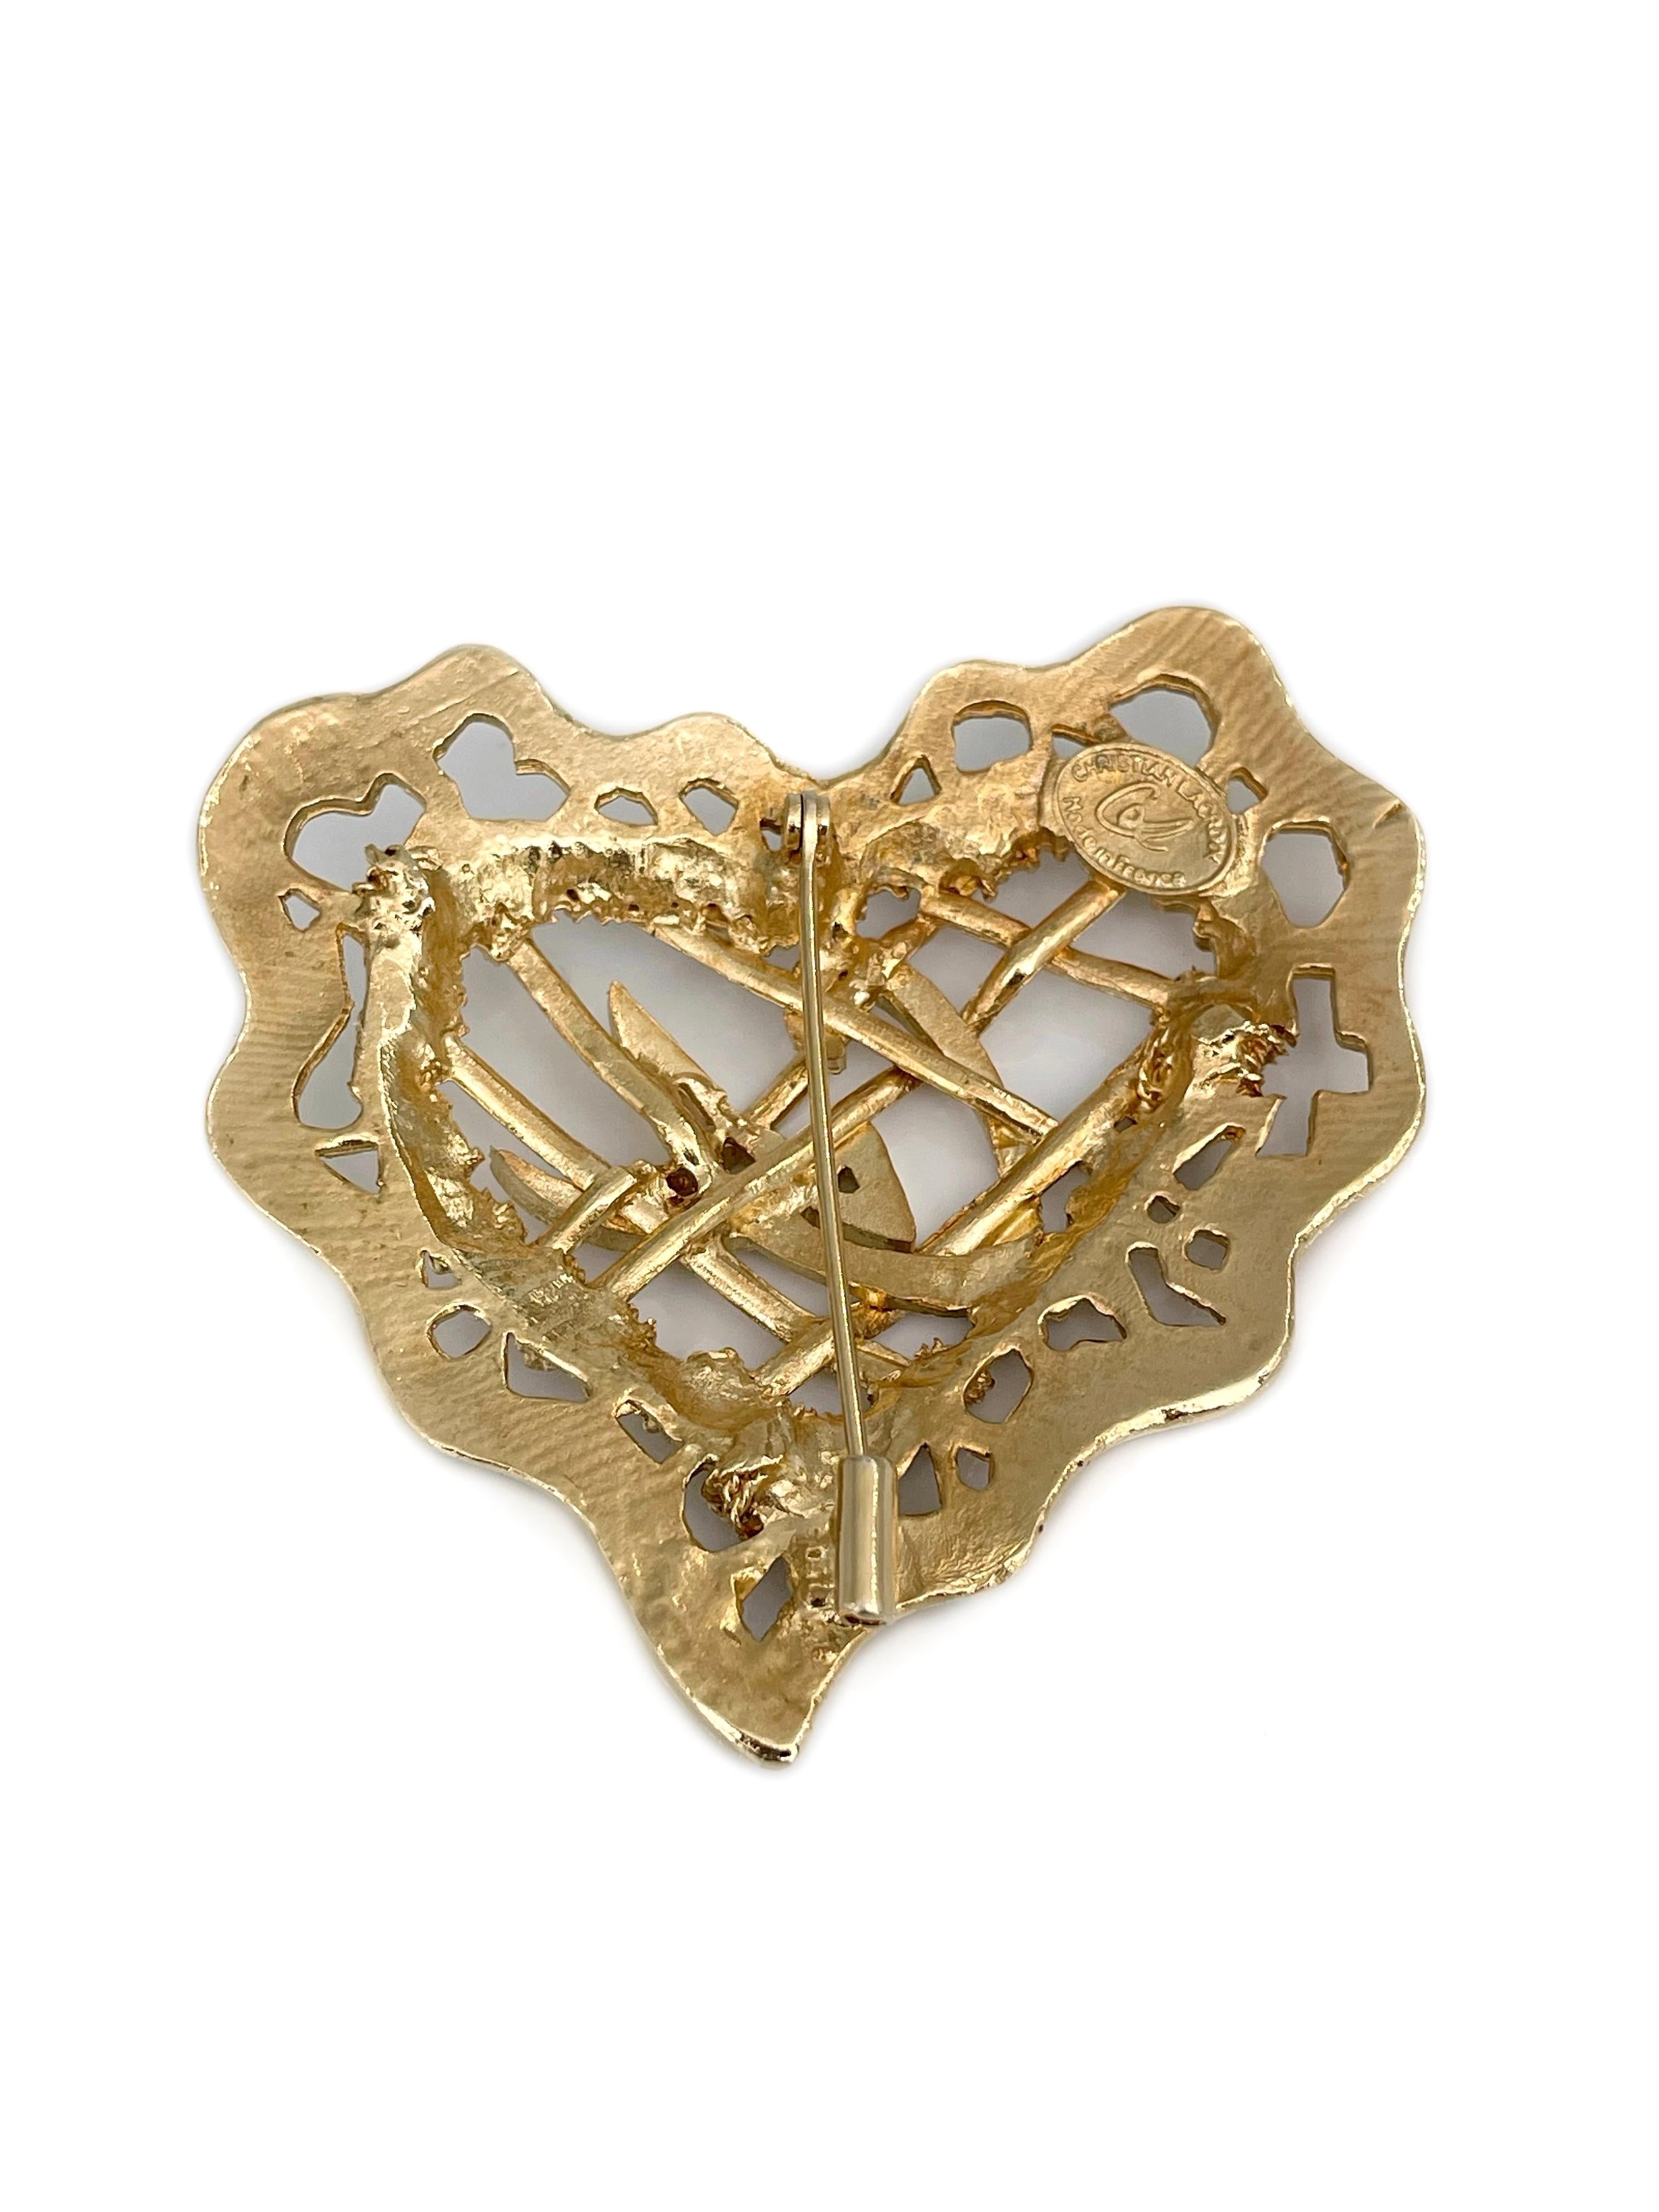 1990s Vintage Christian Lacroix Gold Tone Openwork Design CL Heart Pin Brooch In Good Condition For Sale In Vilnius, LT